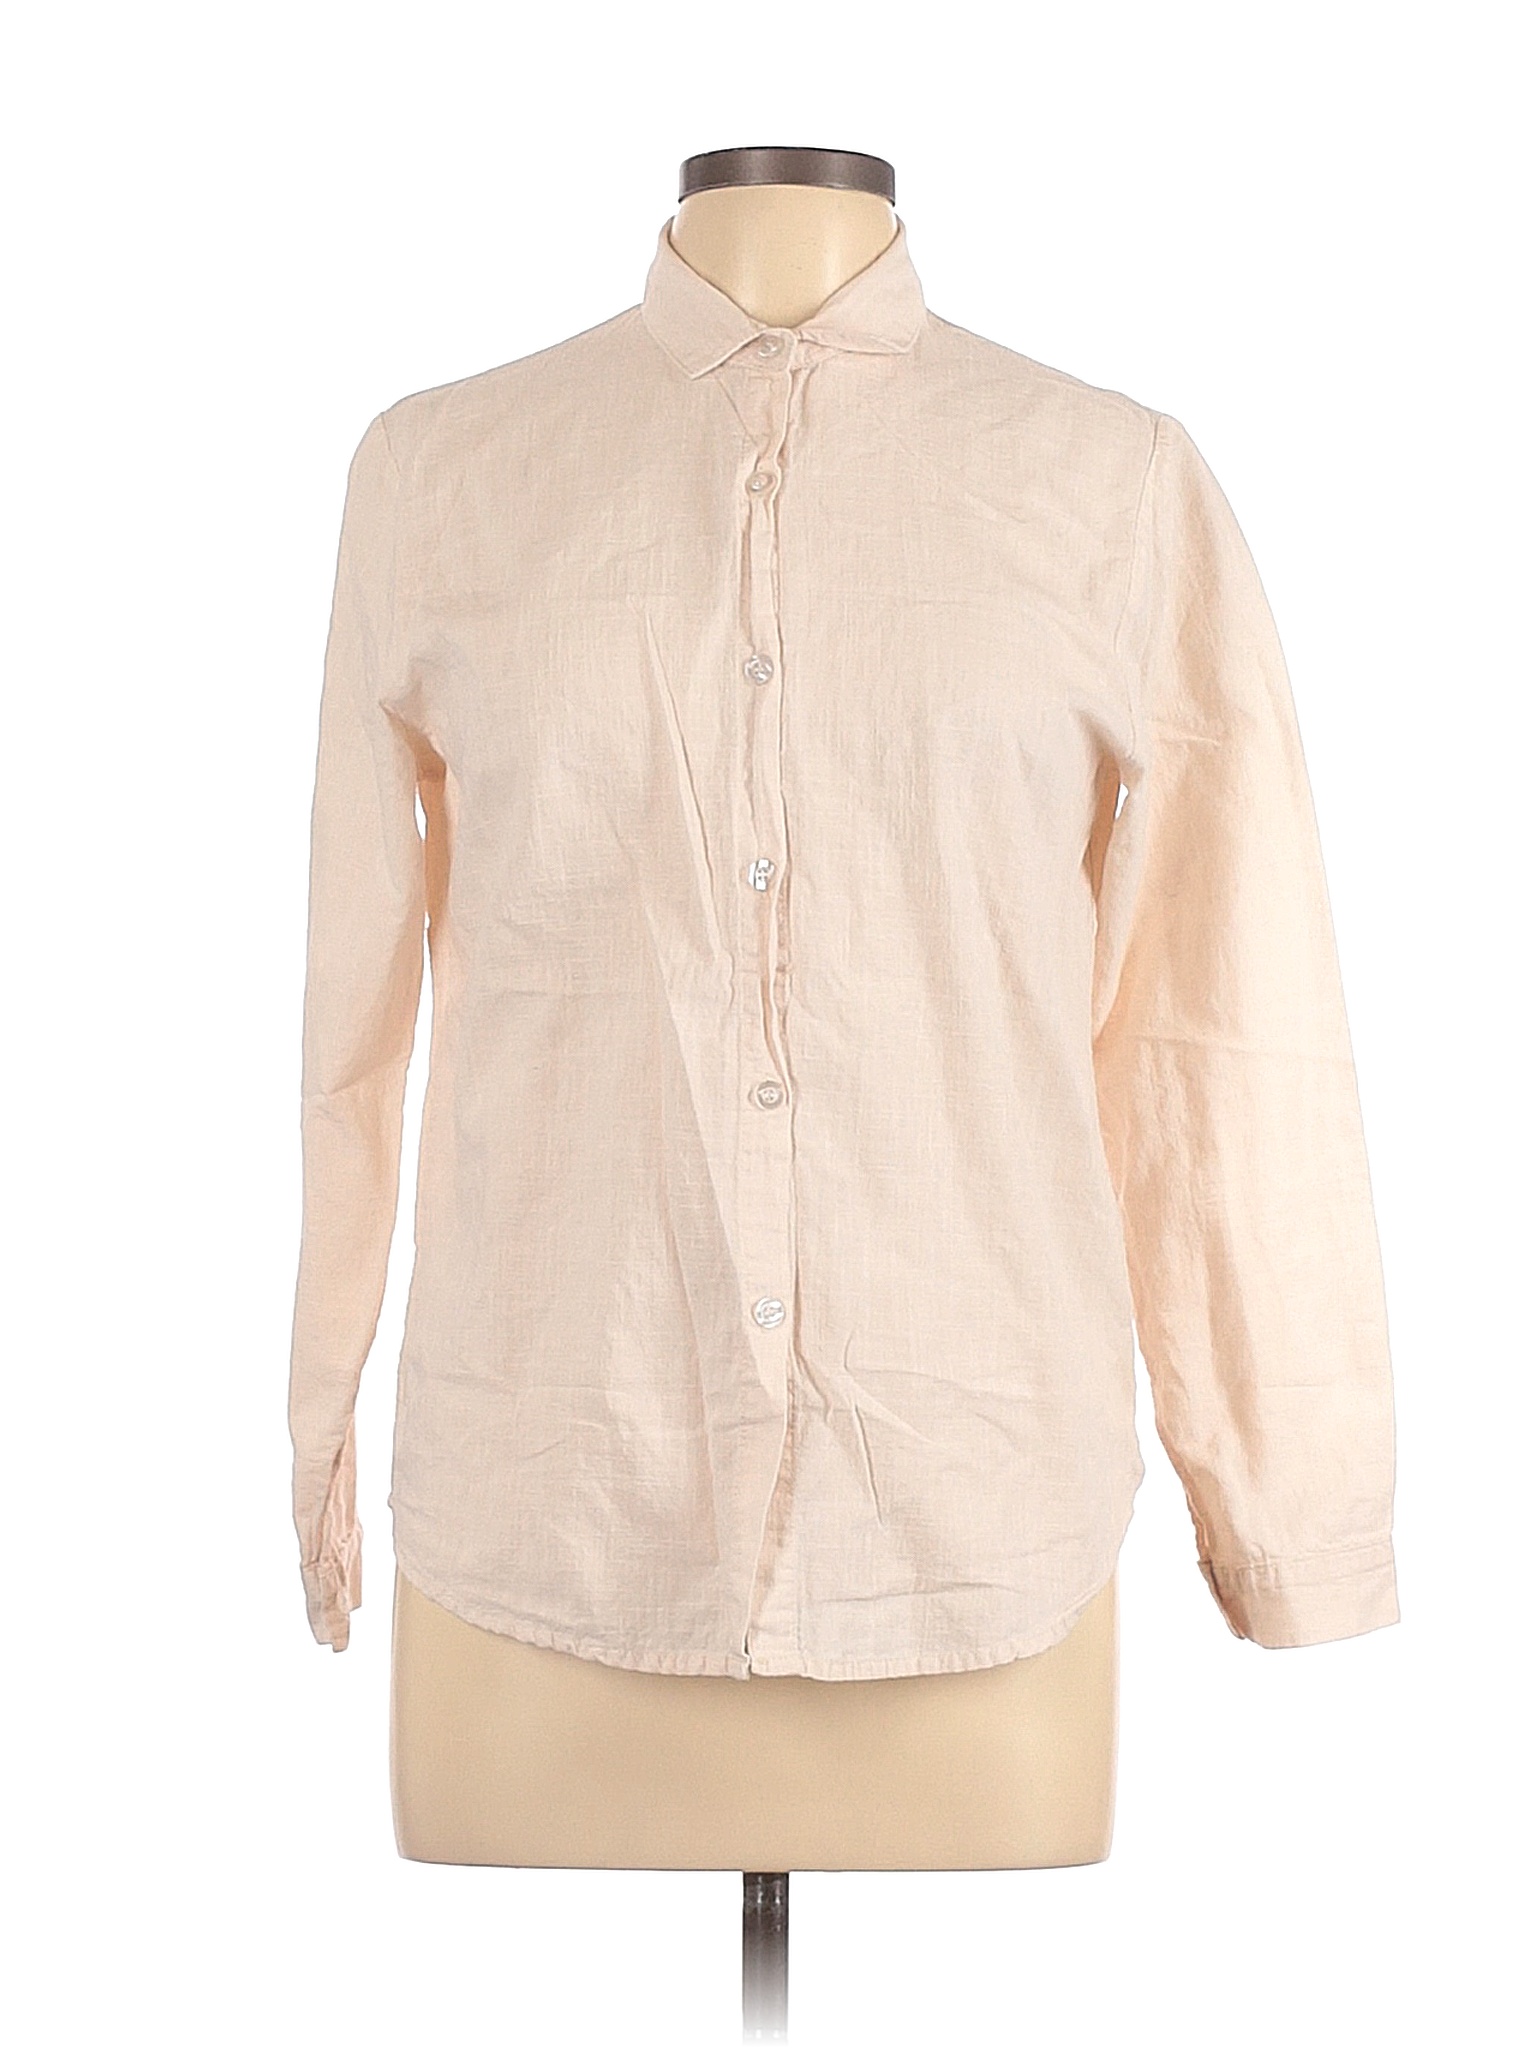 Misslook 100% Linen Solid Tan Ivory Long Sleeve Button-Down Shirt Size ...